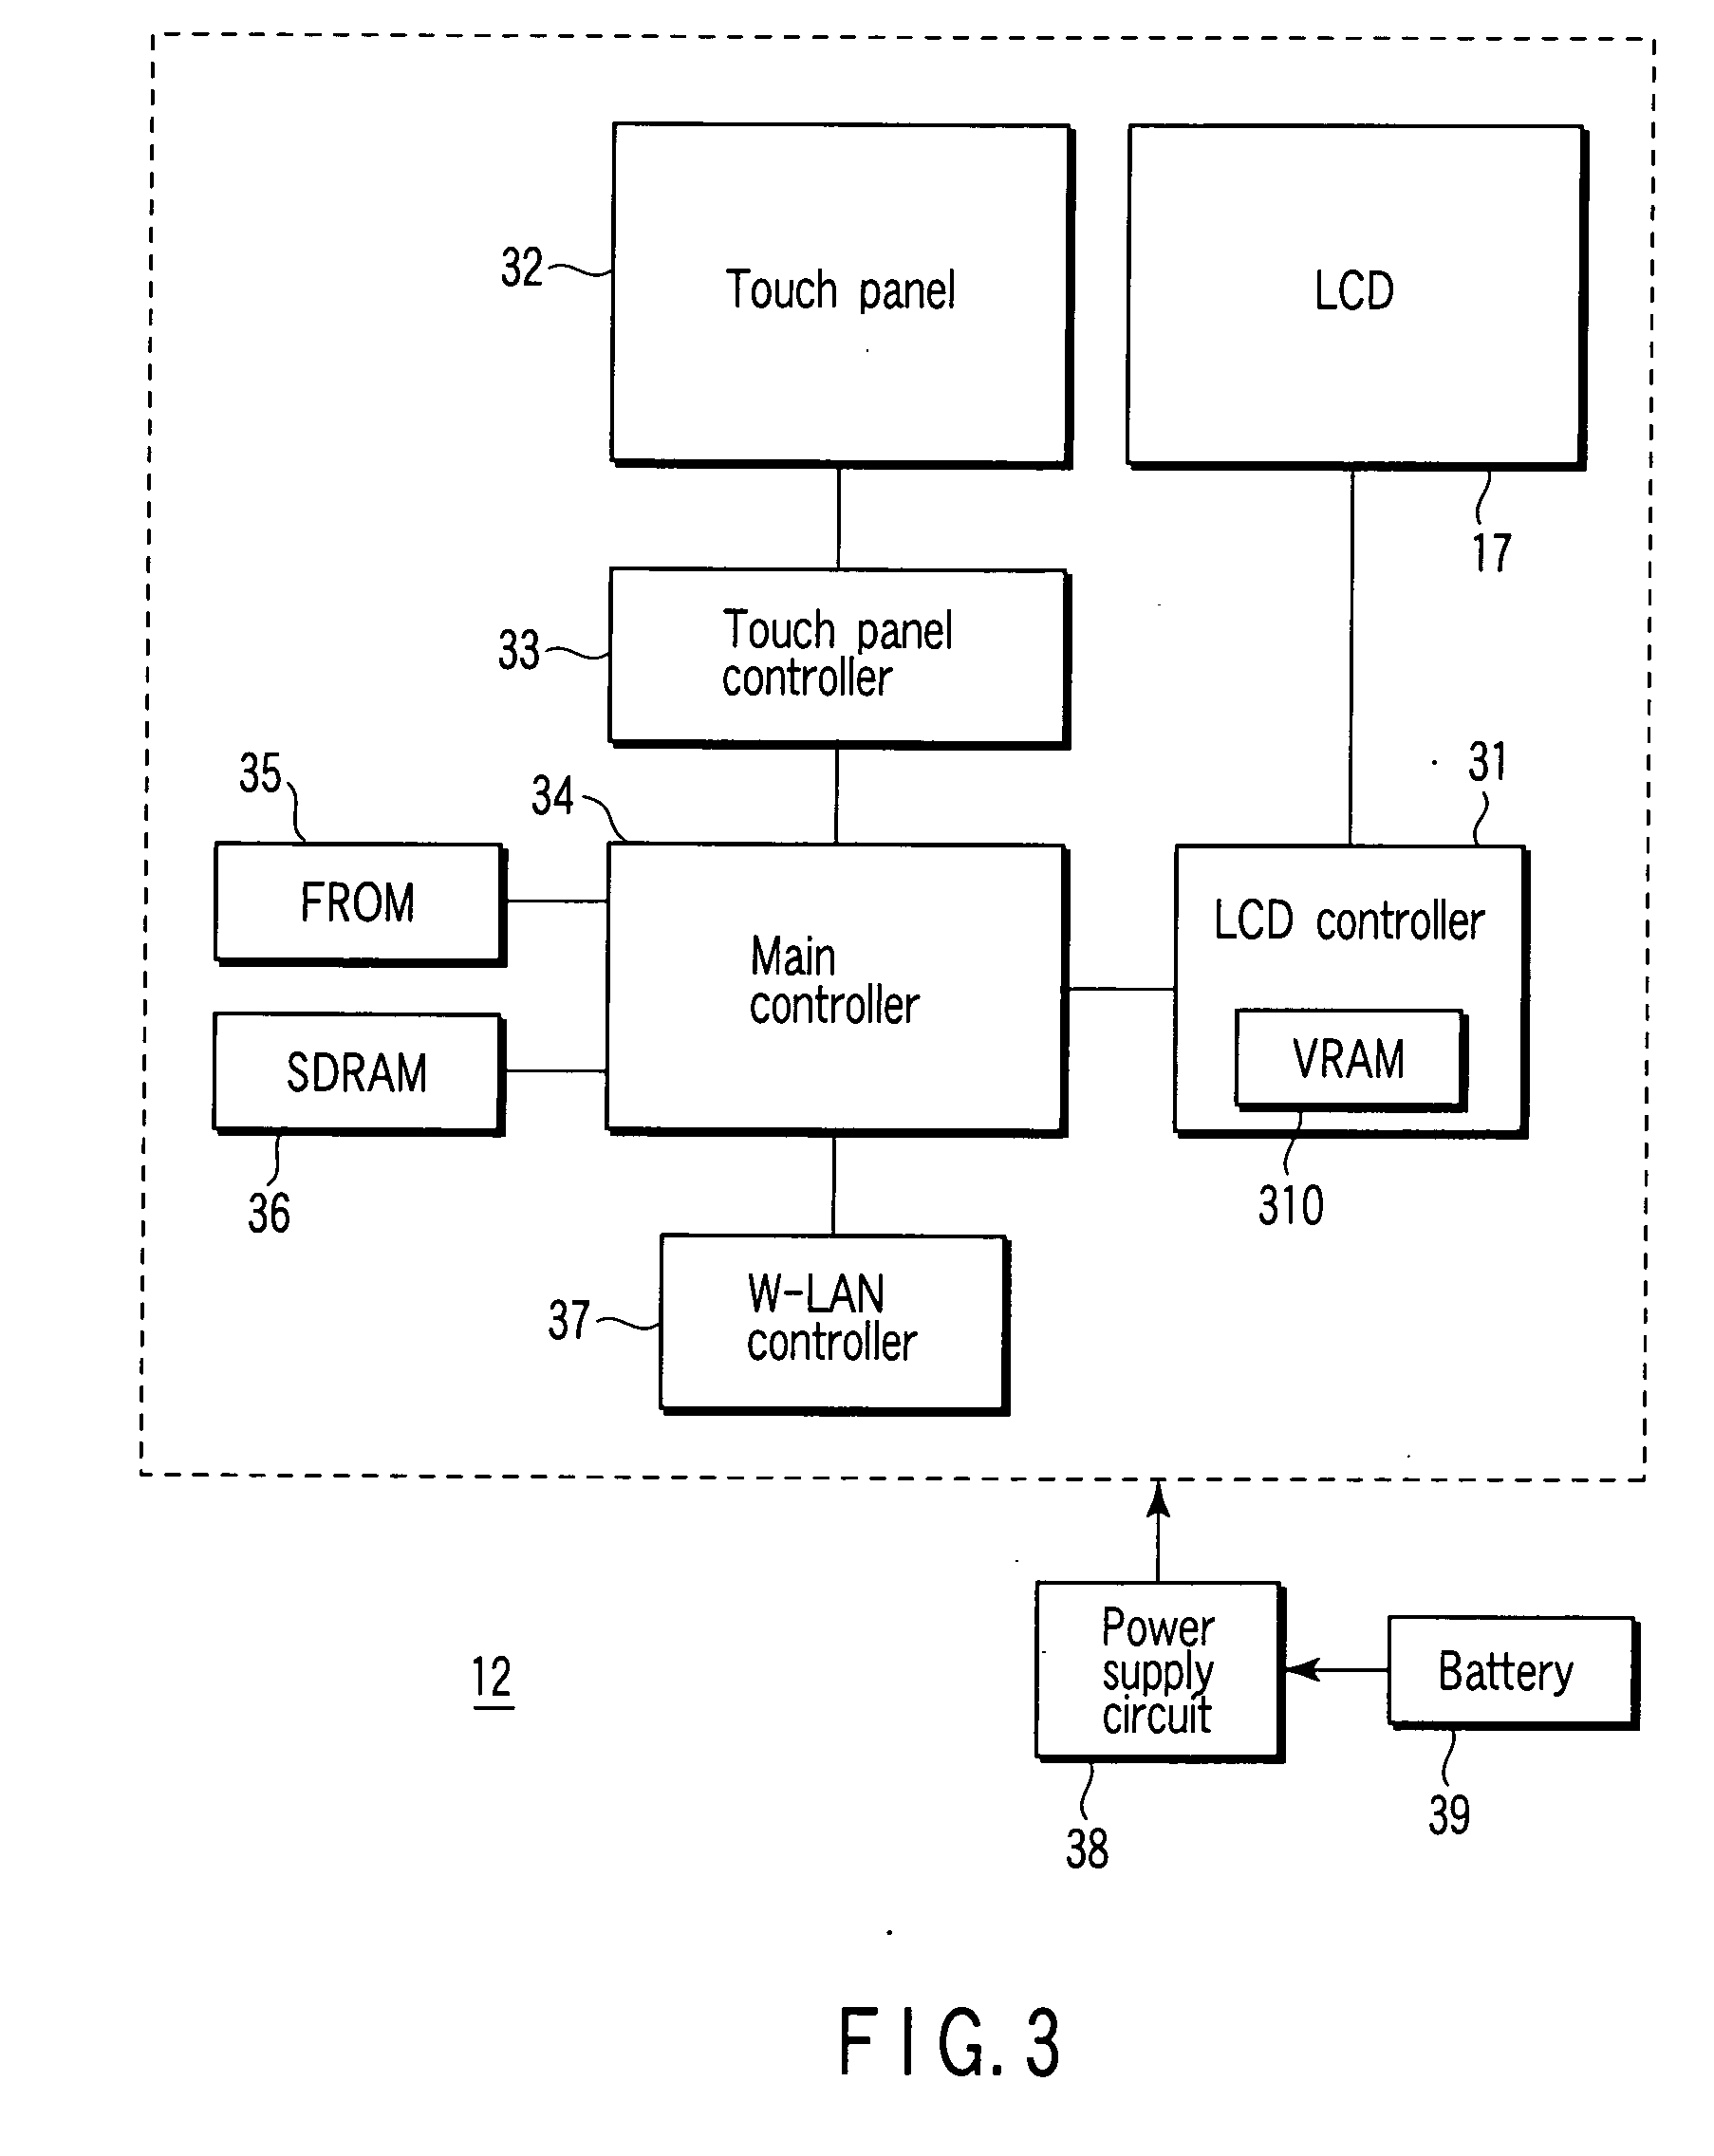 Electronic device with auxiliary unit that is usable detached from main unit of electronic device